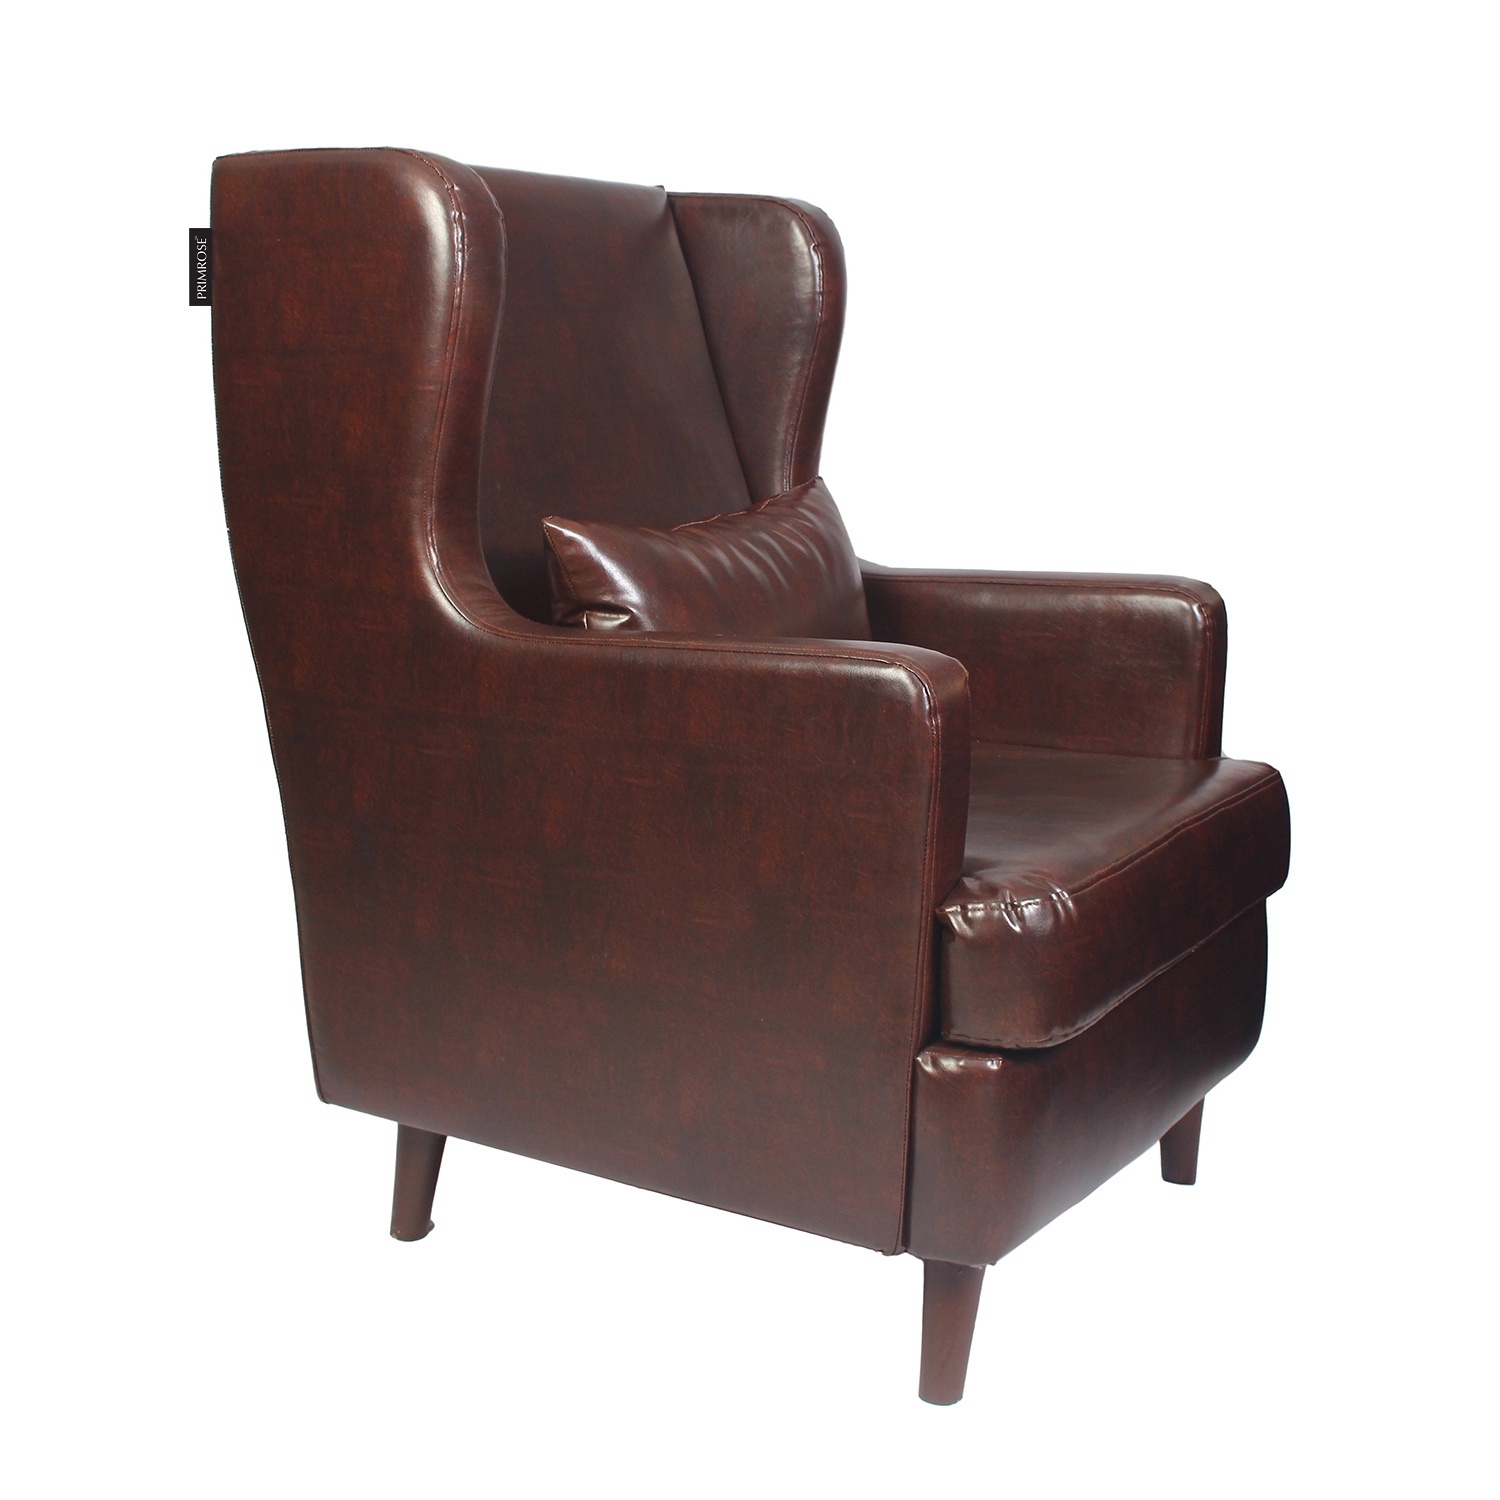 PRIMROSE Wing High Back Art Leather Fabric Chair - Coffee Brown  